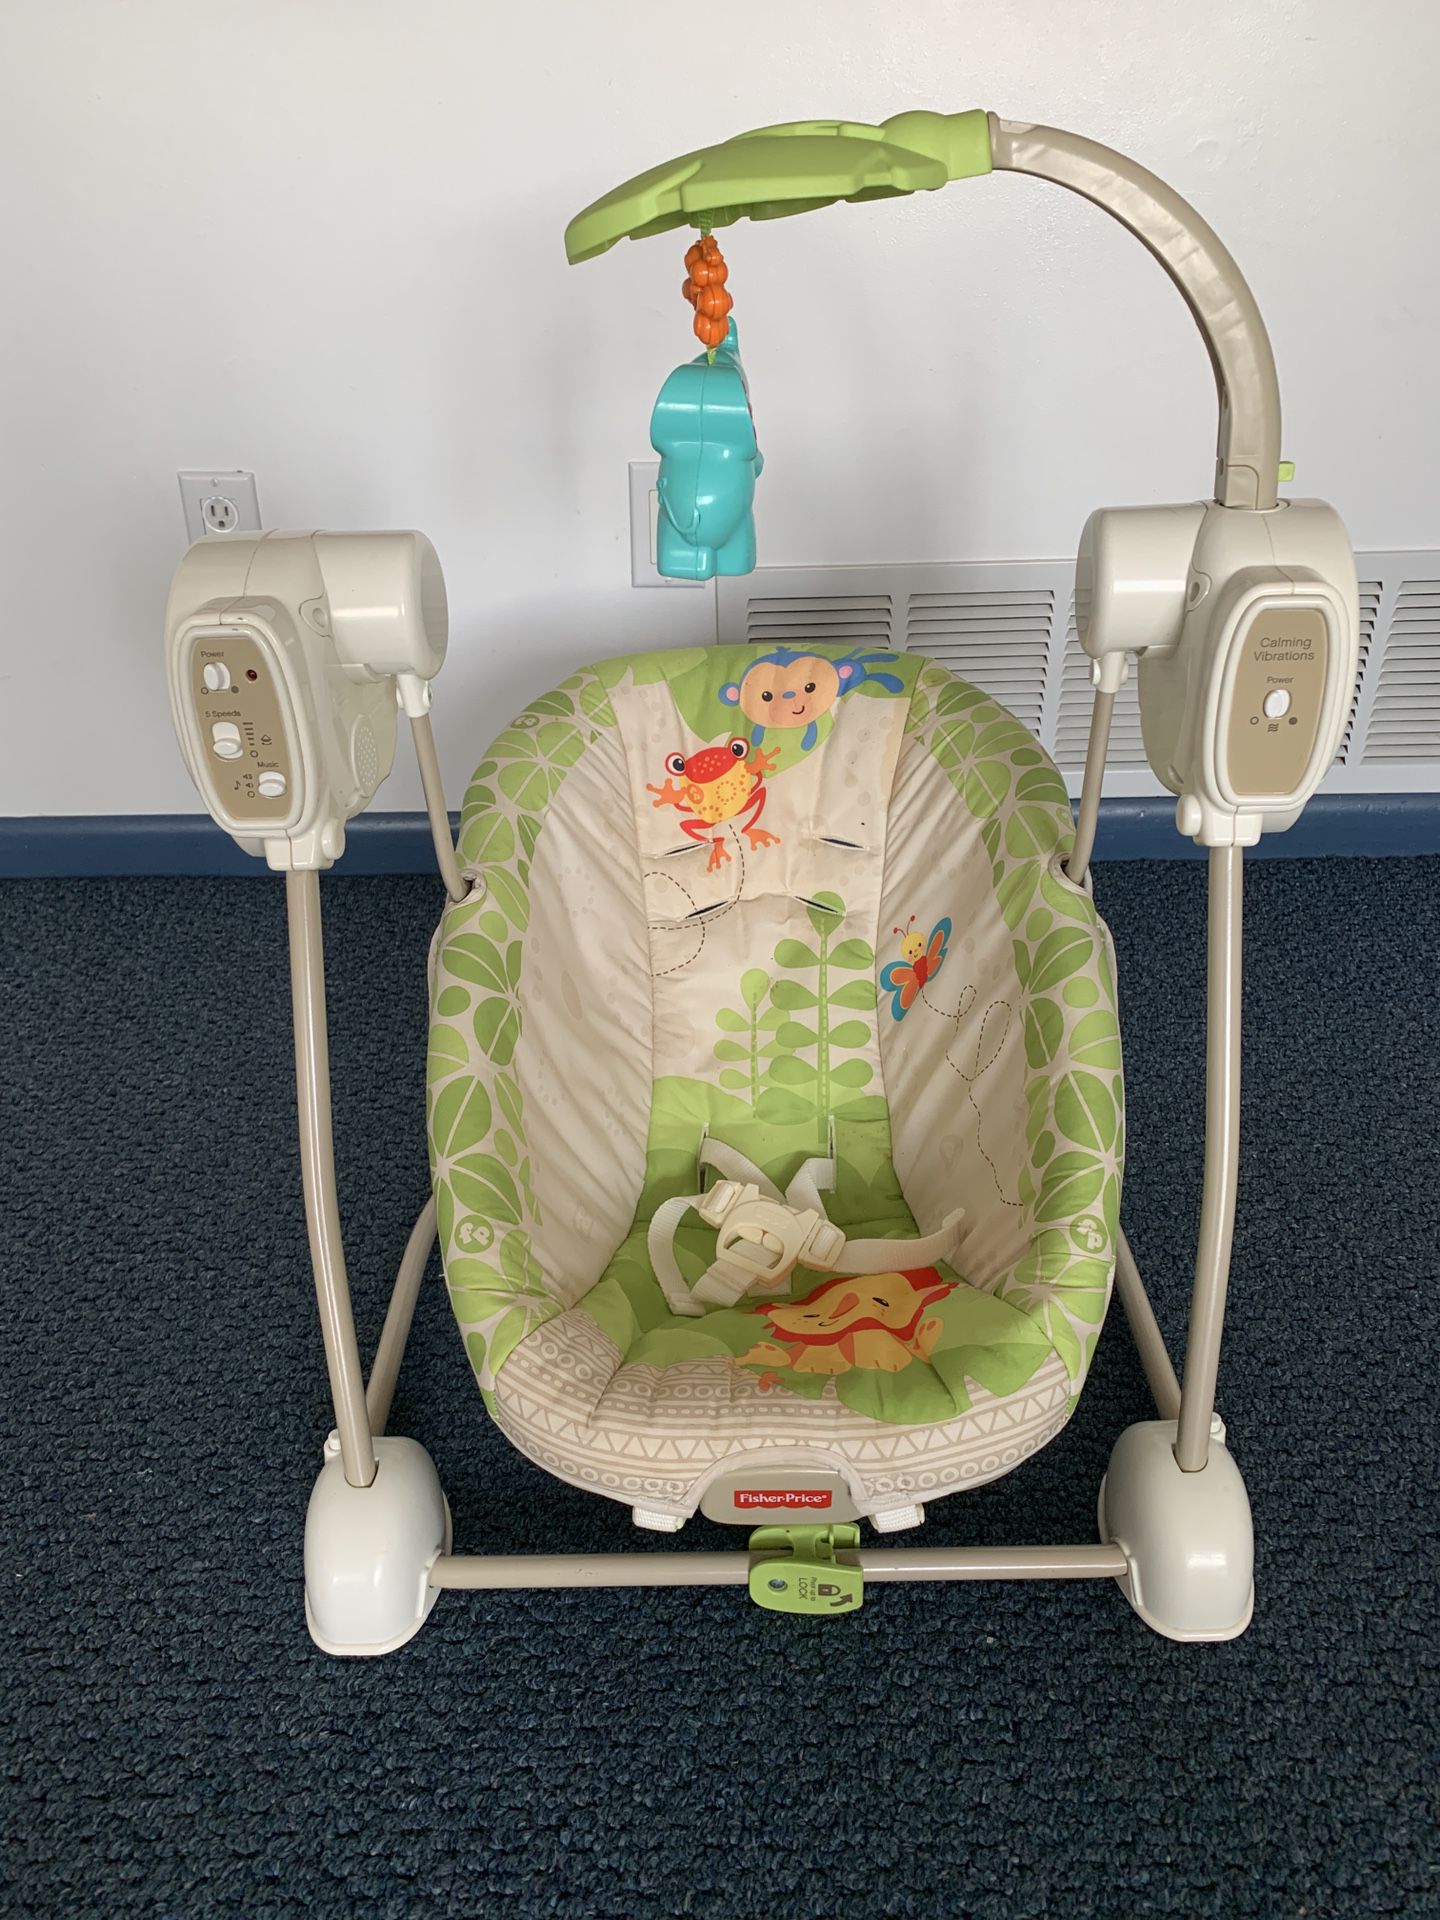 Fisher-Price baby swings/ music, claiming vibrations and 5 swinging speeds